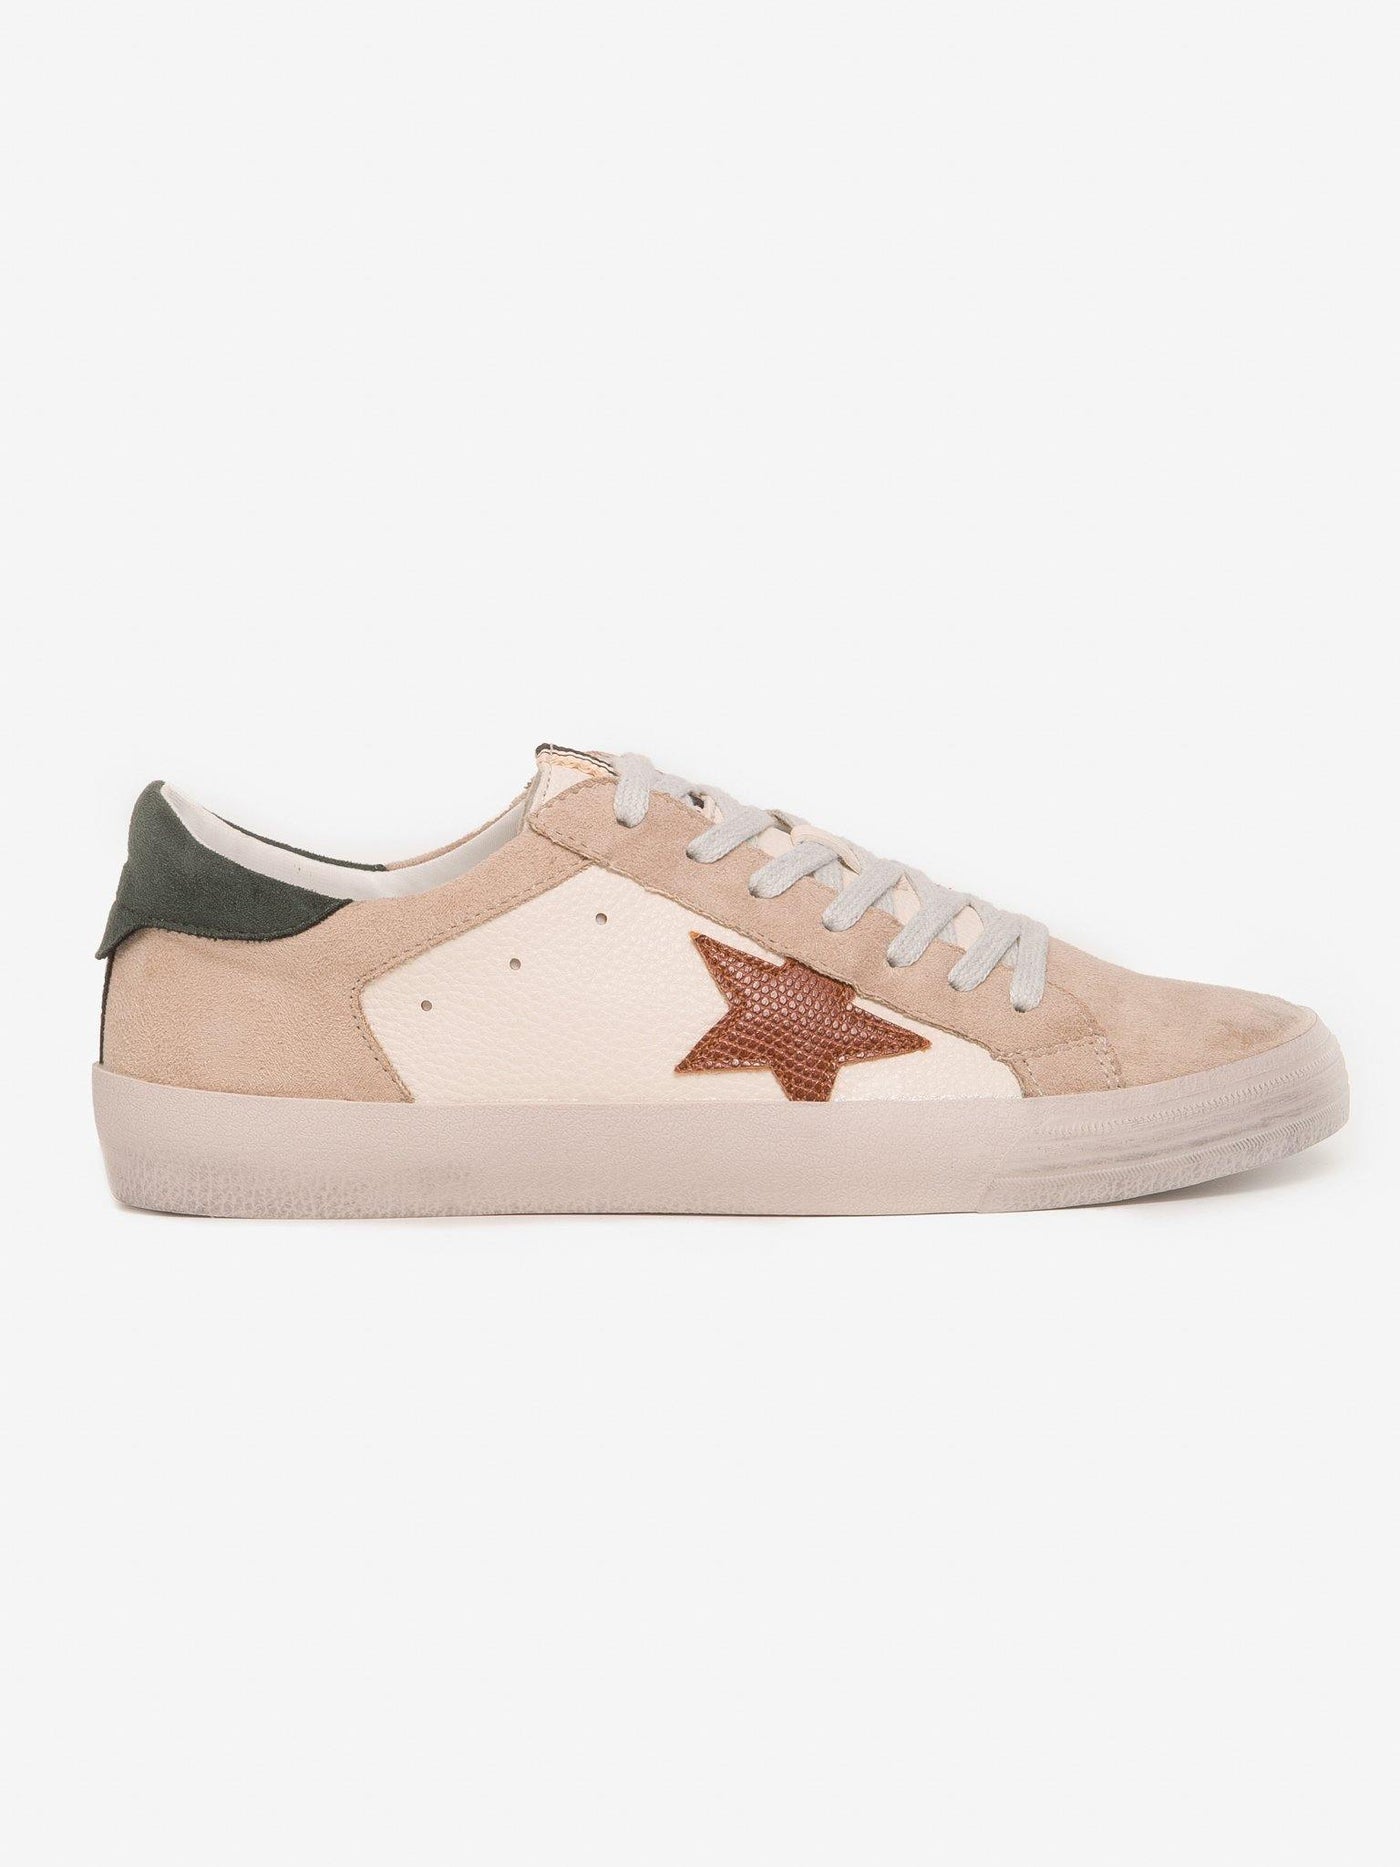 Bamba STAR Taupe/Verde - MMShoes